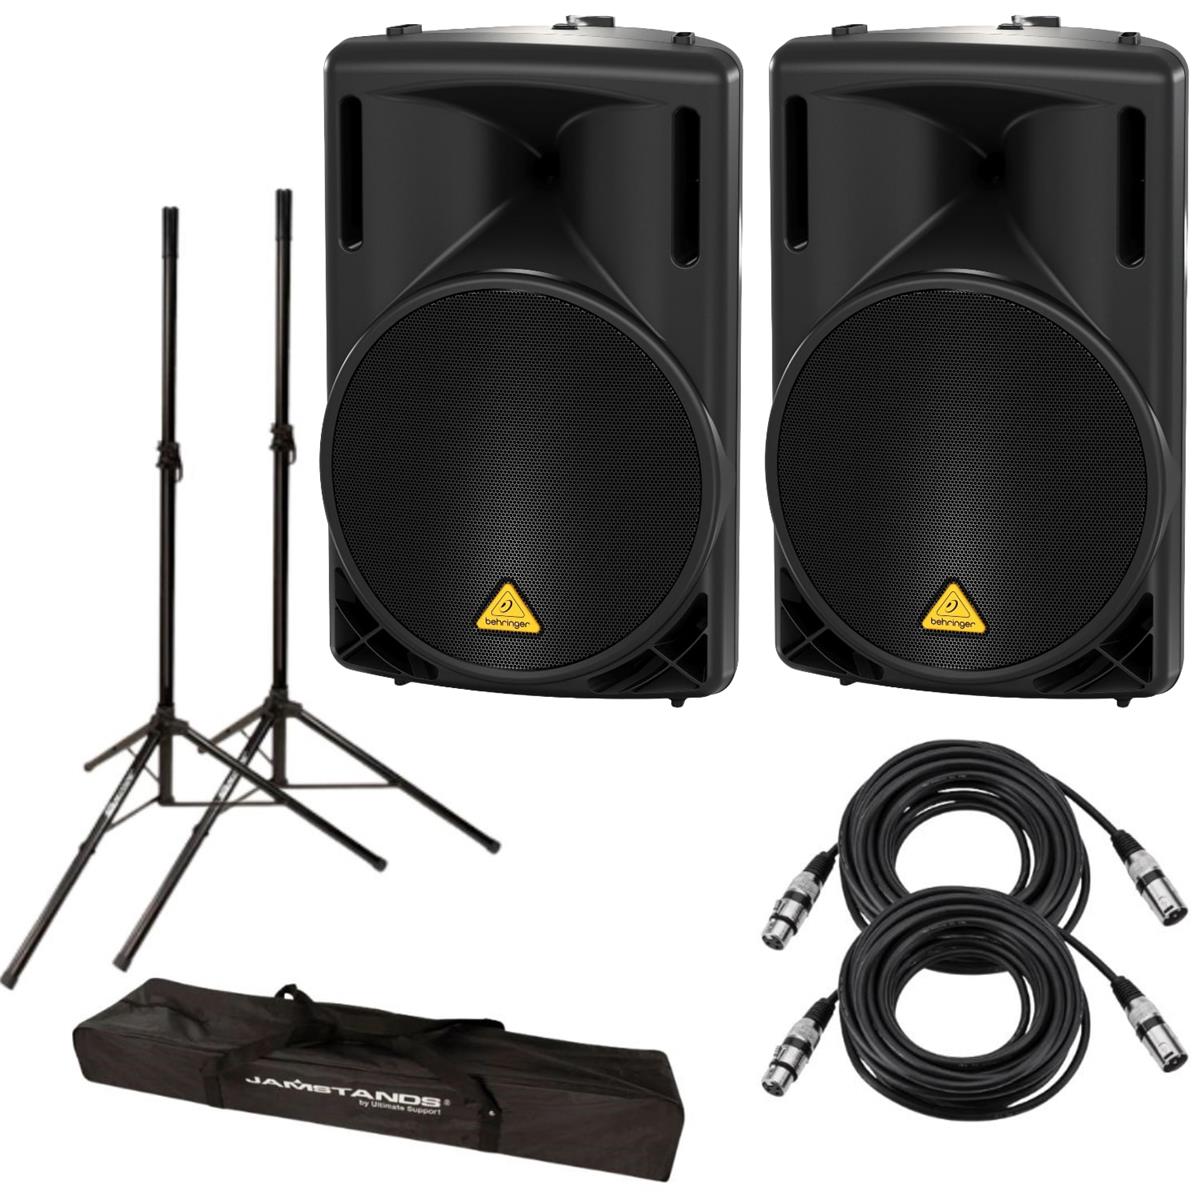 Behringer EUROLIVE 1000 Watts 2-Way Passive PA Speaker, W 2x Stands & XLR Cables